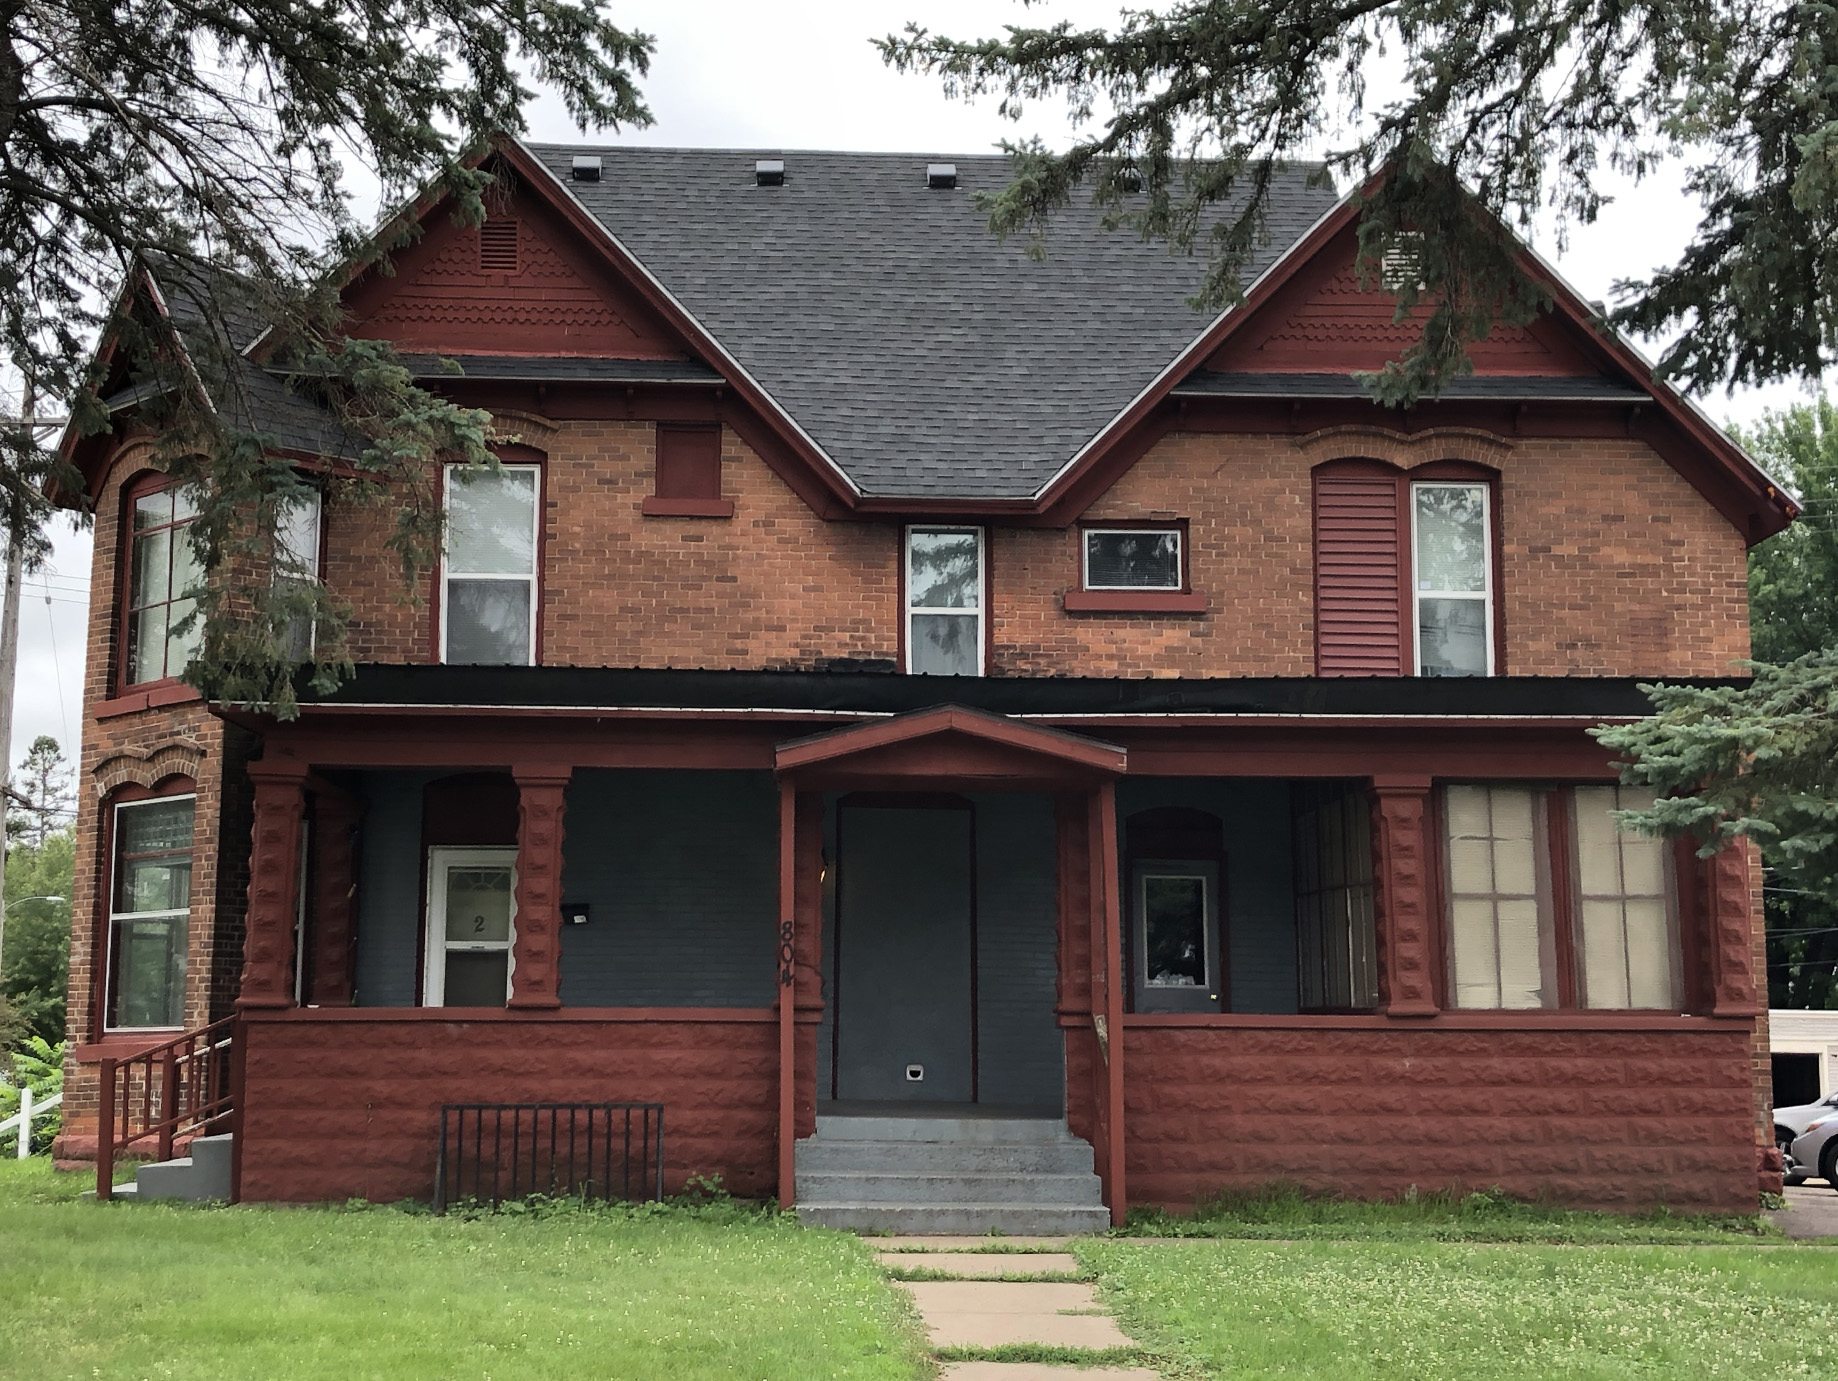 804 5th Ave, Eau Claire, Wisconsin 54703, 2 Bedrooms Bedrooms, ,1 BathroomBathrooms,Multi-Family,Apartment,804 5th Ave,1122